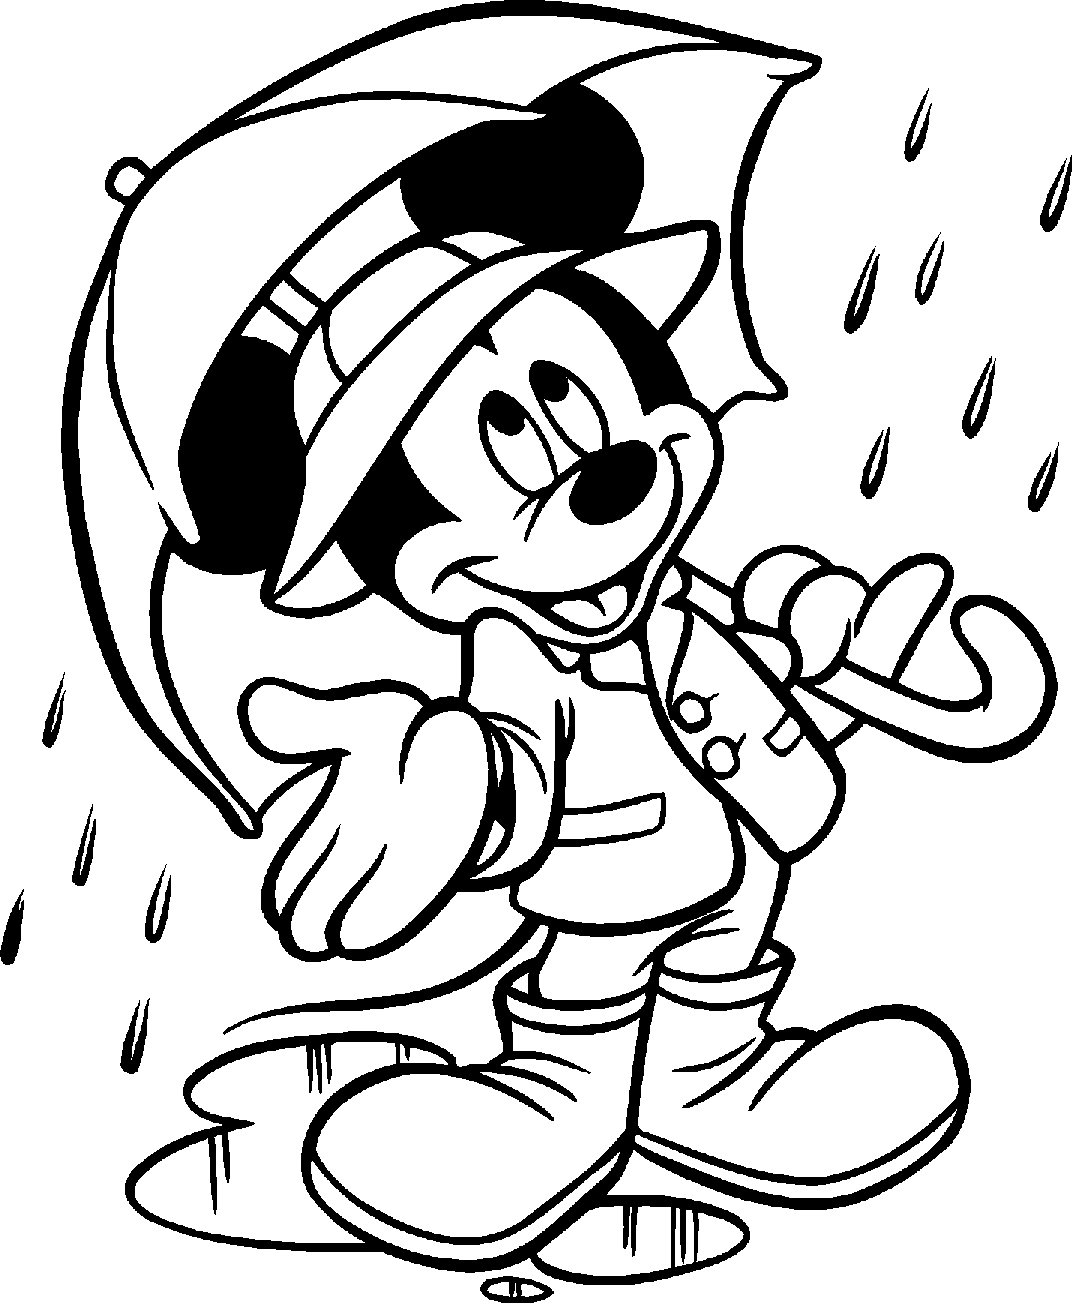 coloring pages mickey mouse clubhouse mickey mouse clubhouse 1 free disney coloring sheets mouse pages coloring mickey clubhouse 